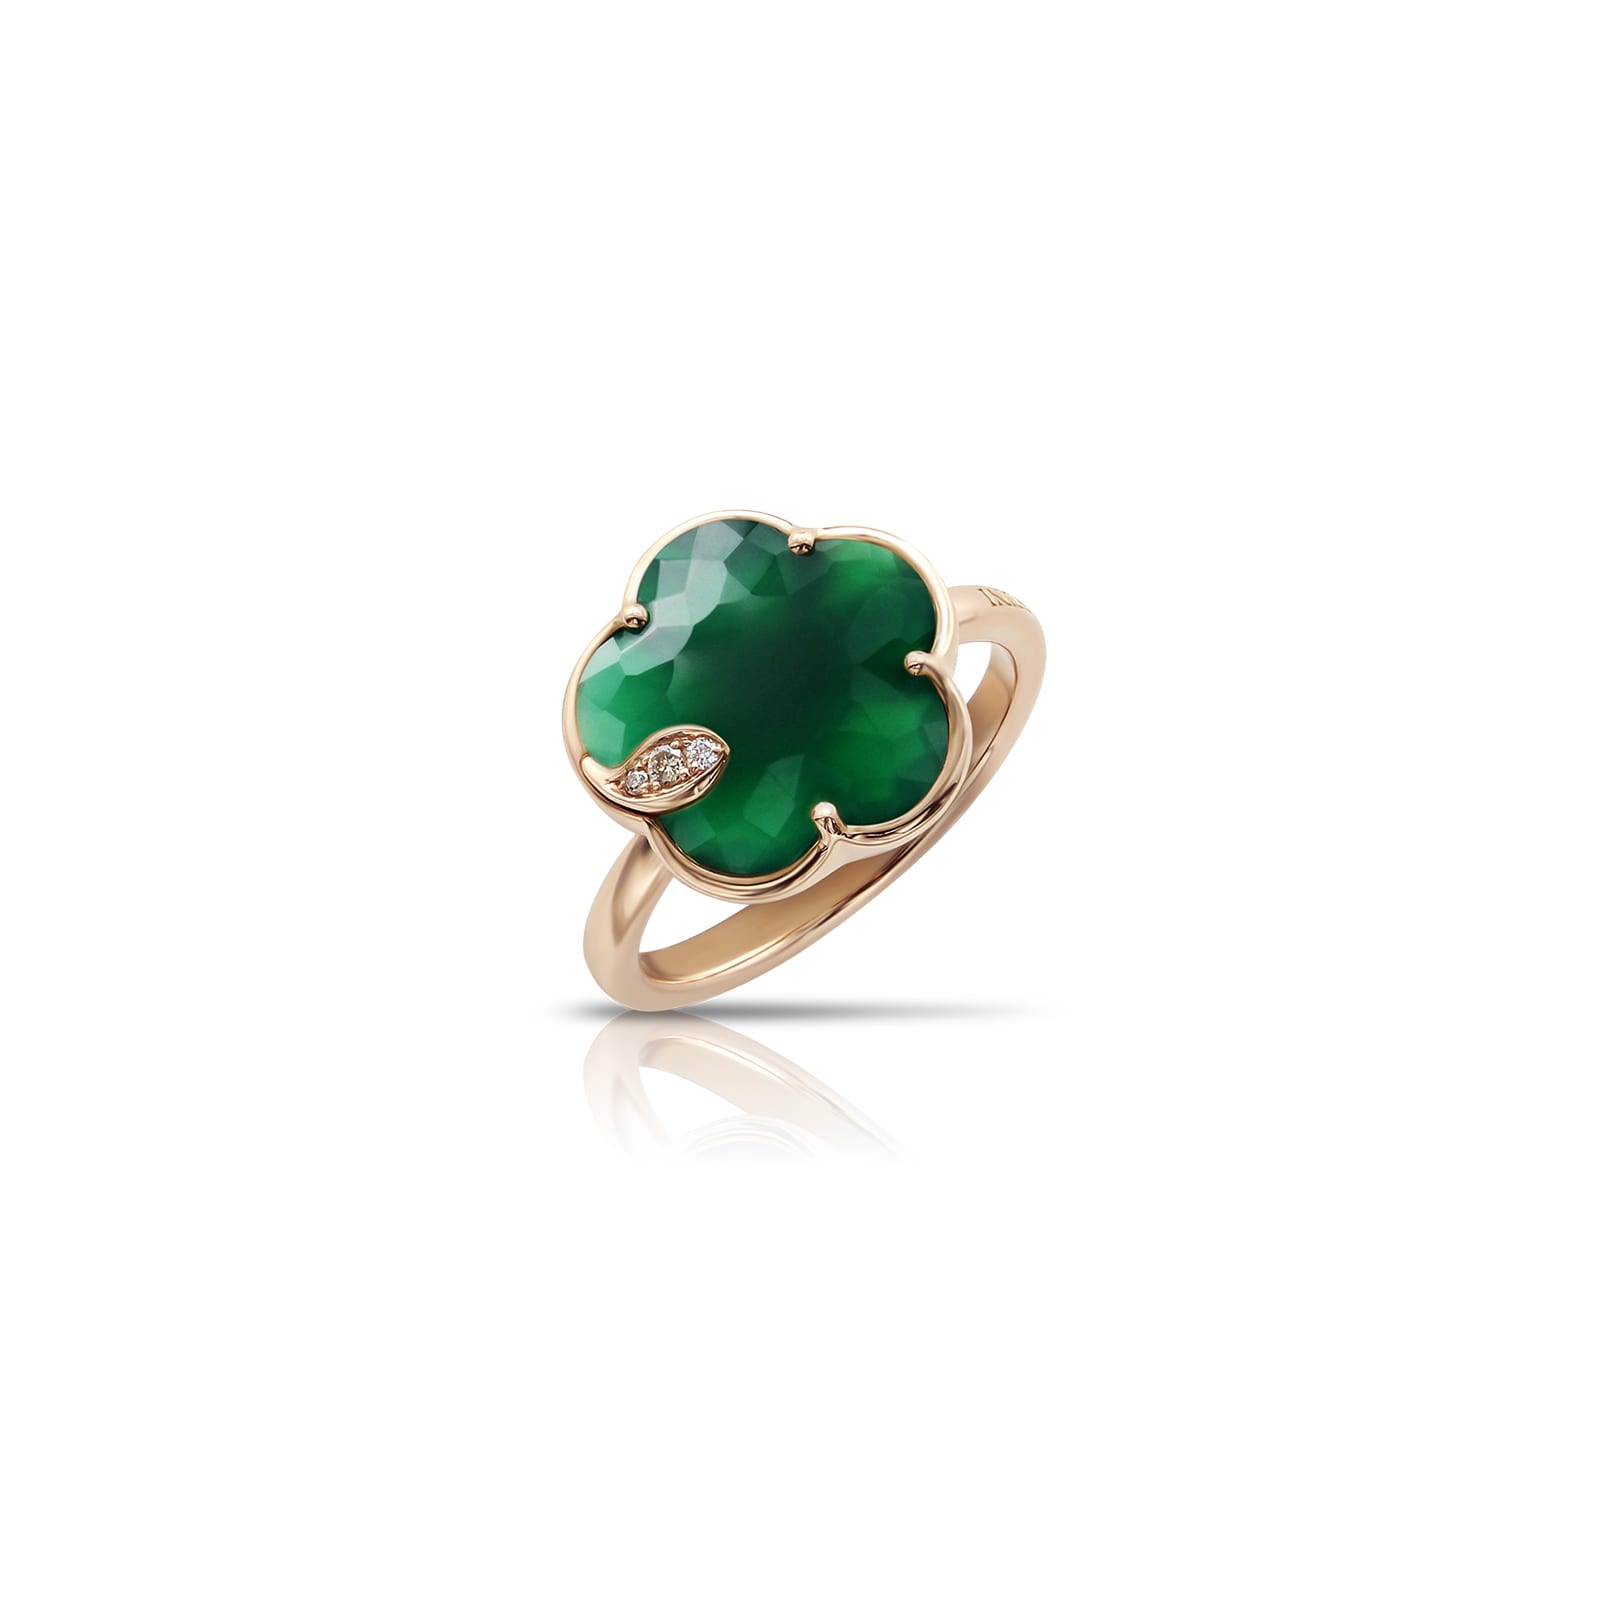 Petit Joli Ring in 18ct Rose Gold with Green Agate and Diamonds - Ring Size M